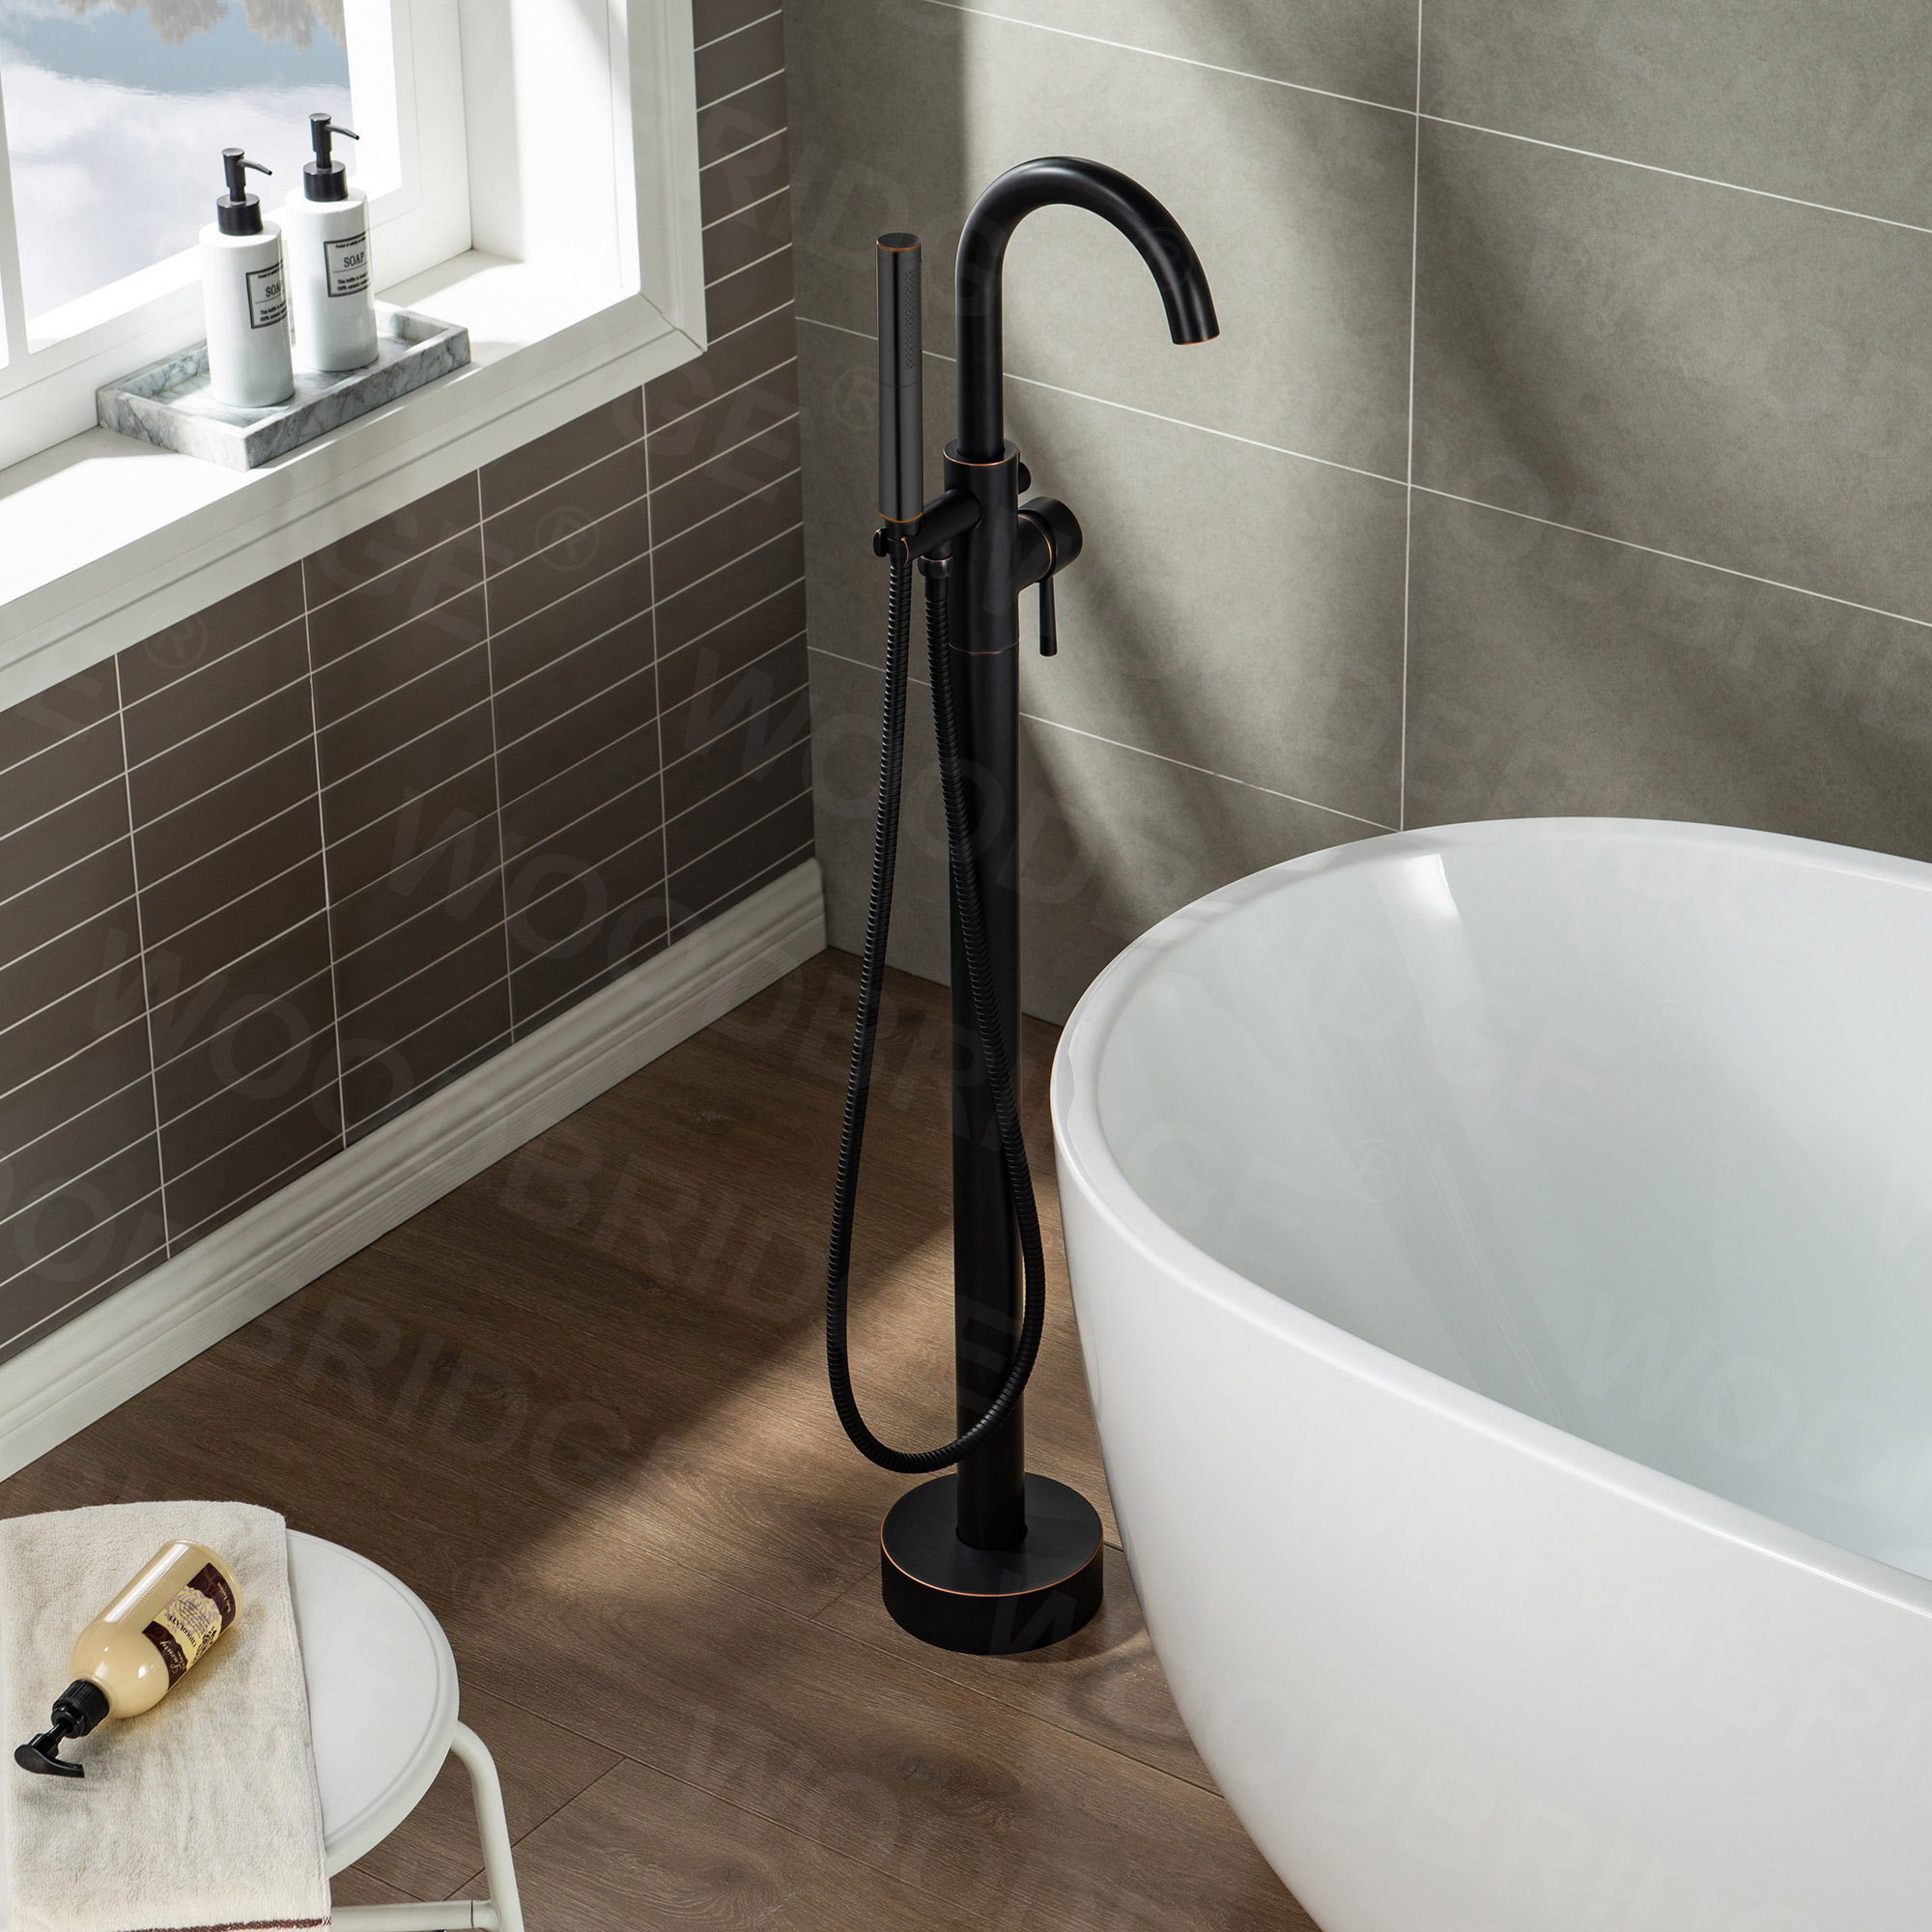  WOODBRIDGE F0010ORBDR Contemporary Single Handle Floor Mount Freestanding Tub Filler Faucet with Hand shower in Oil Rubbed Bronze Finish._14272